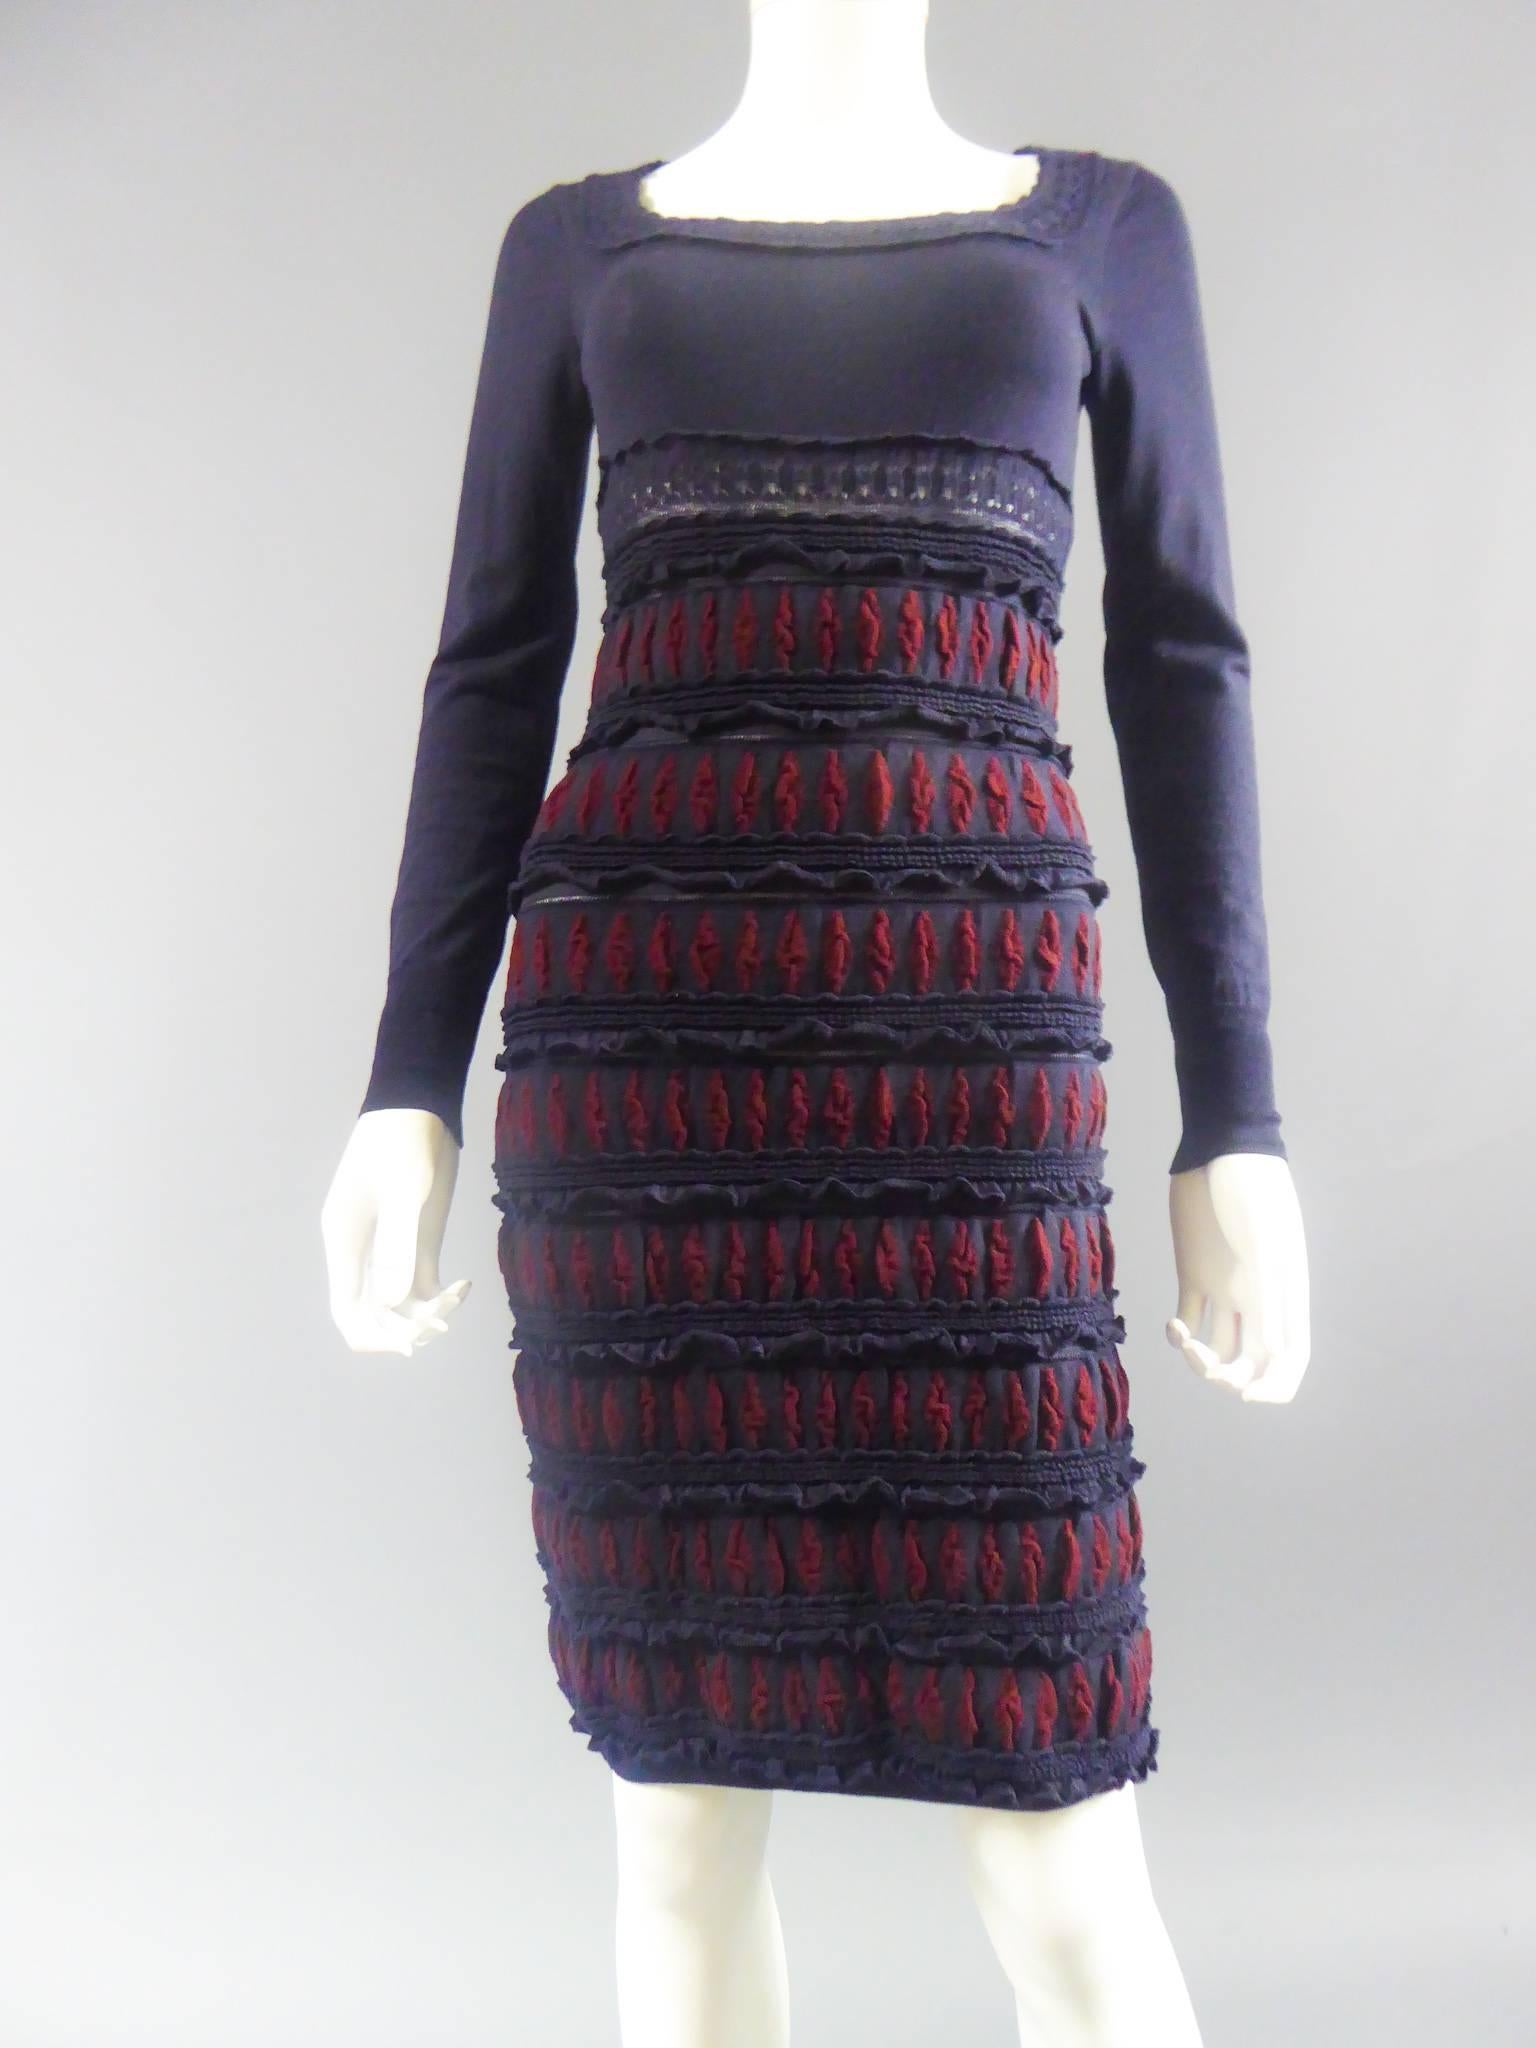 Circa 2000

France

Azzedine Alaïa long-sleeved dress and midi skirt in navy blue and red wool. Detail of wool lace on the collar, under the chest. Dress skirt alternating openworks, ruffles and oval patterns on navy blue stripes background. The